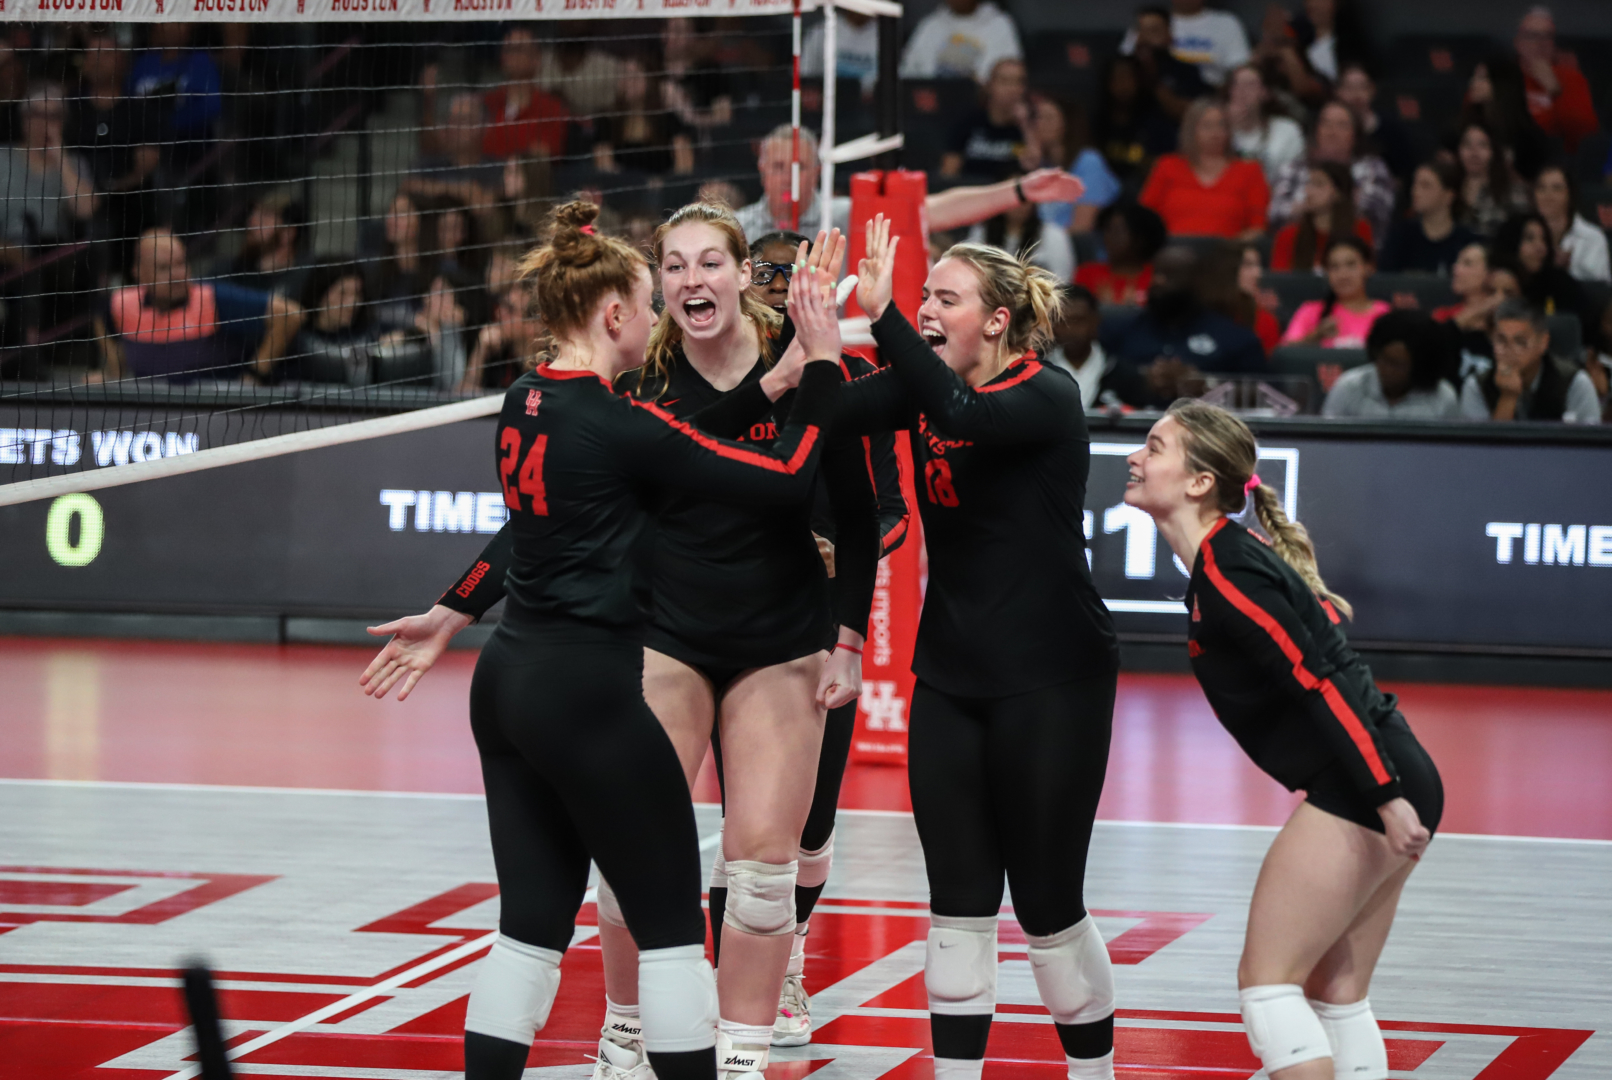 UH volleyball plays South Dakota on Friday in Omaha, Nebraska in the first round of the NCAA Tournament. | Sean Thomas/The Cougar